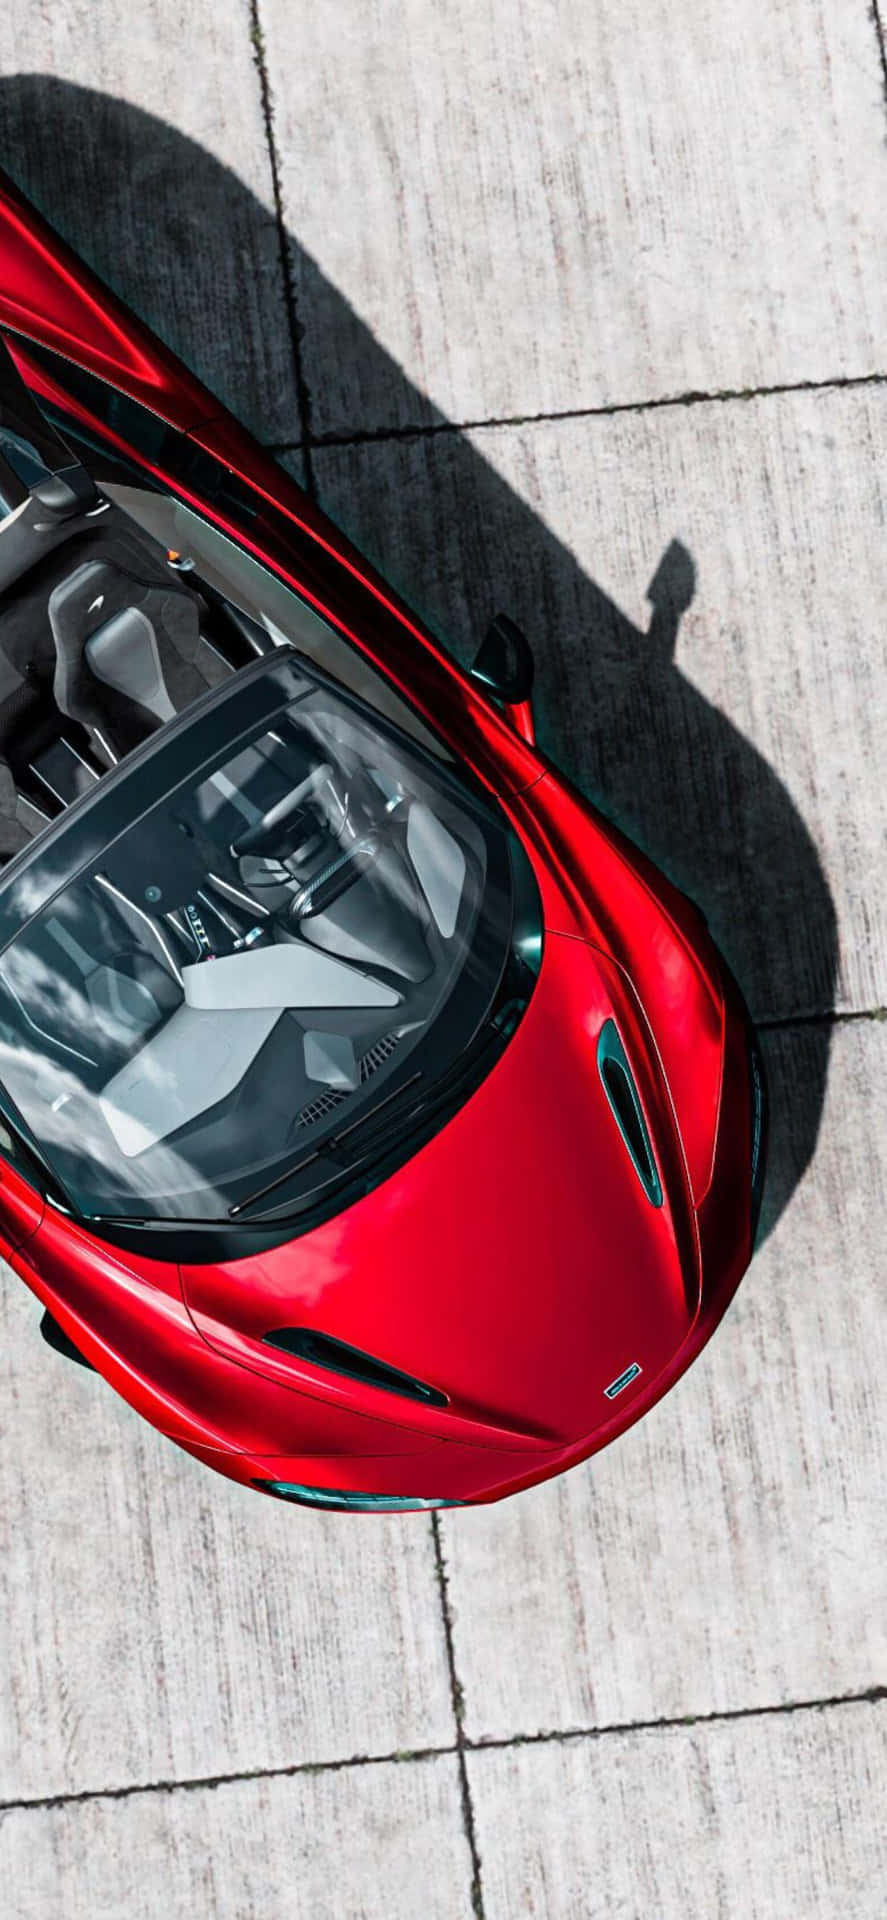 The mix of luxurious technology and speed with the Iphone Xs Max Mclaren 720S.